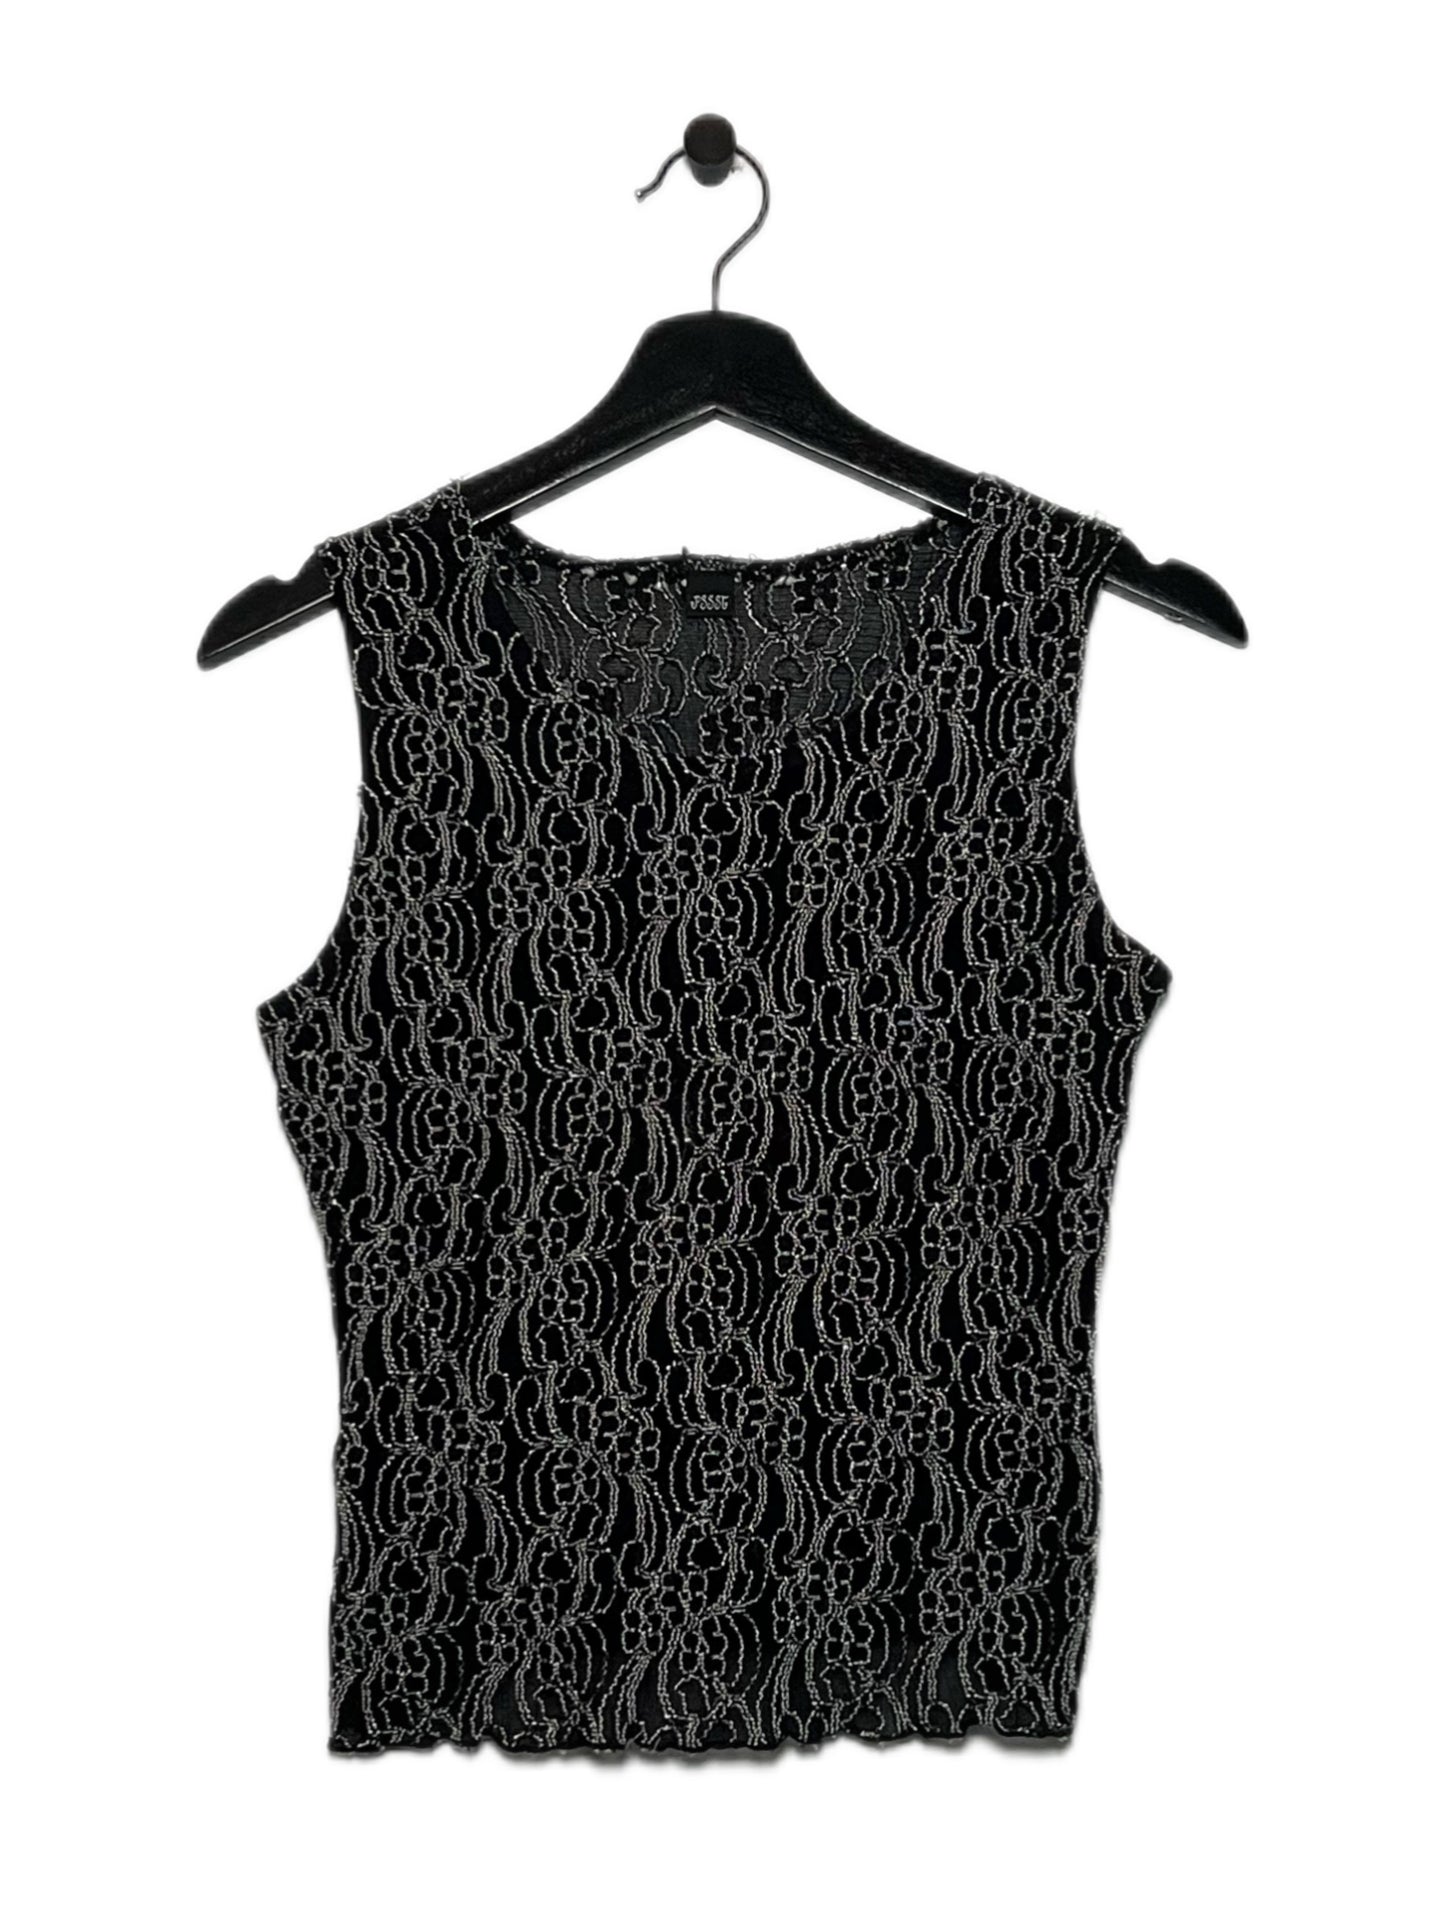 Y2K Black and White Embroidered Top